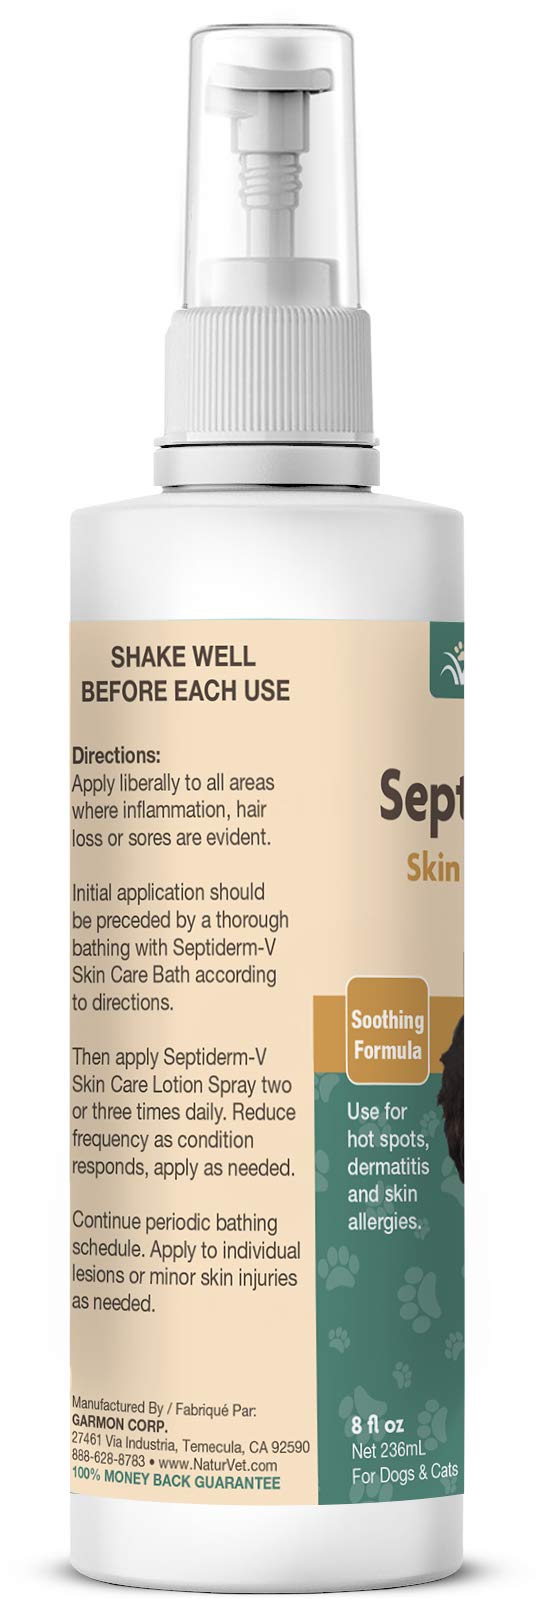 [Australia] - NaturVet - Septiderm-V Skin Care Lotion Spray - 8 oz - Helps Relieve Itching Due to Skin Problems - Use for Hot Spots, Dermatitis, Skin Allergies - for Dogs & Cats 